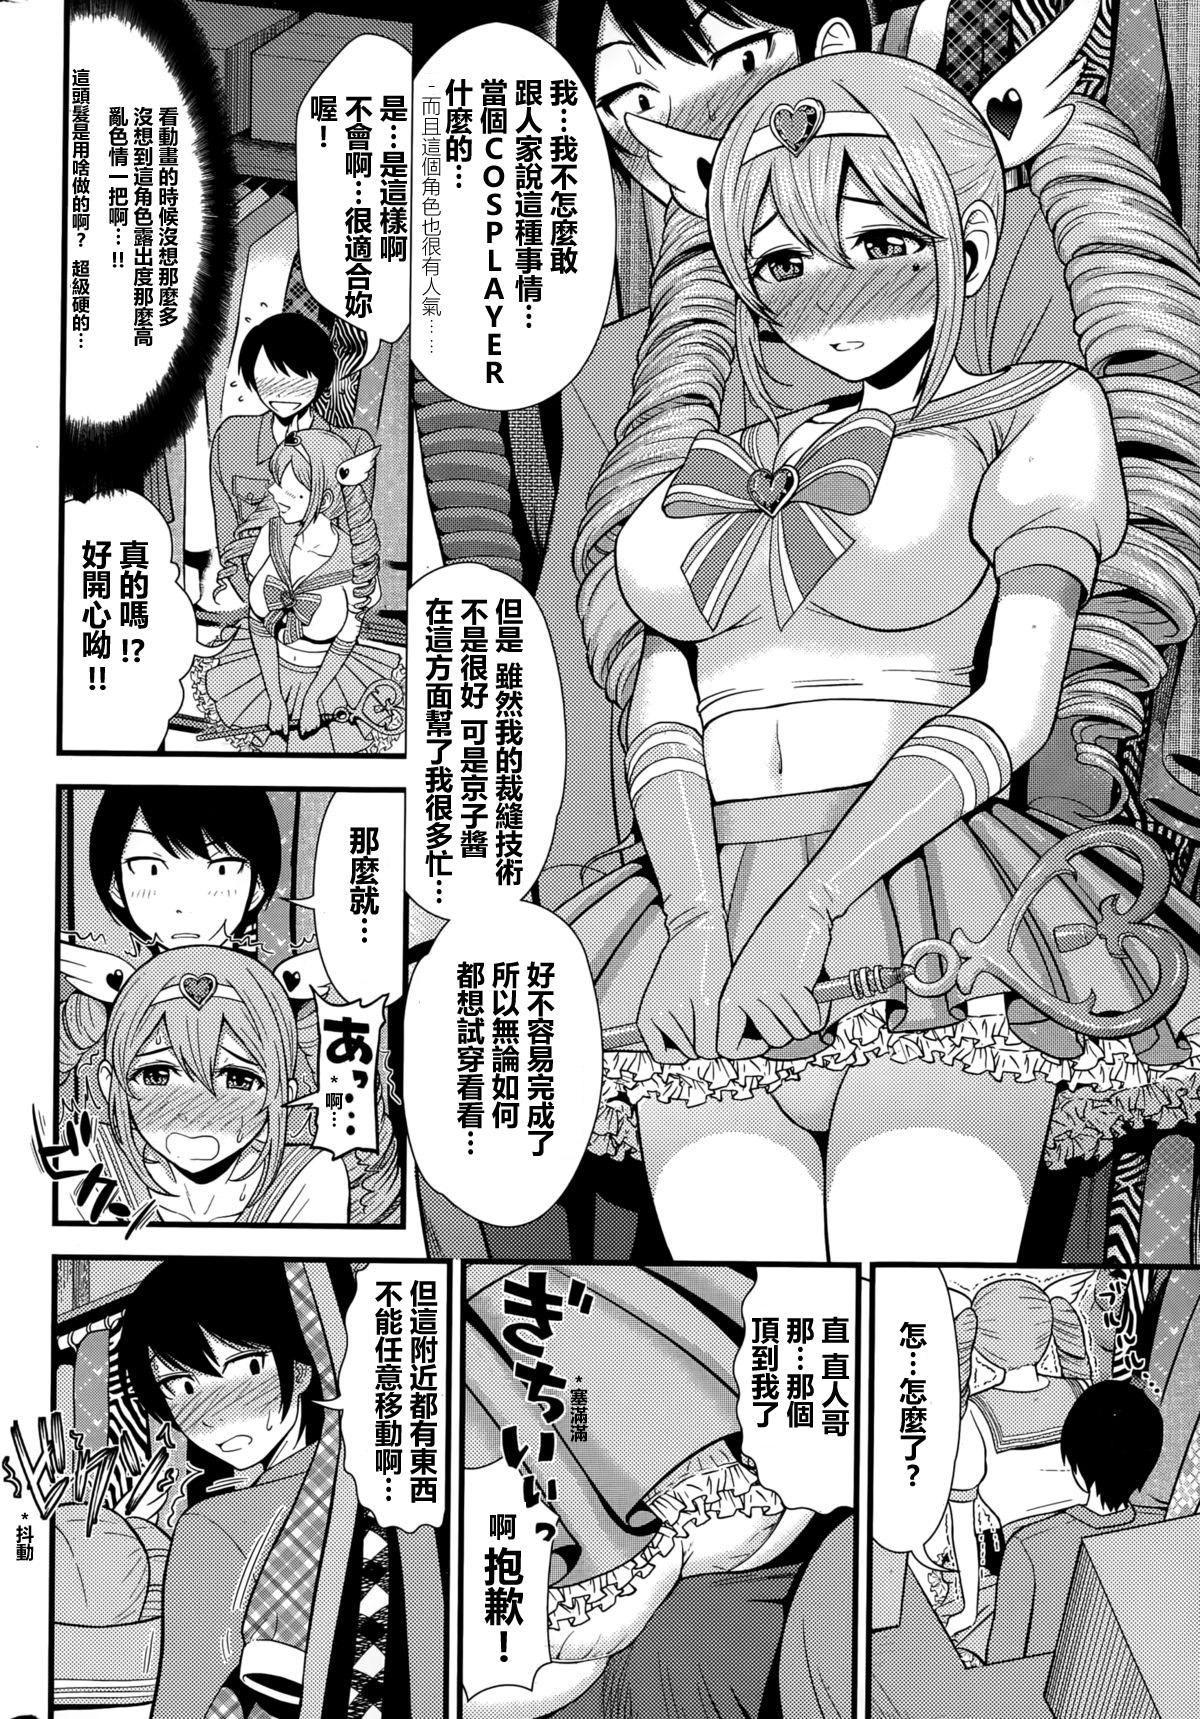 Female order maid Brother Sister - Page 4